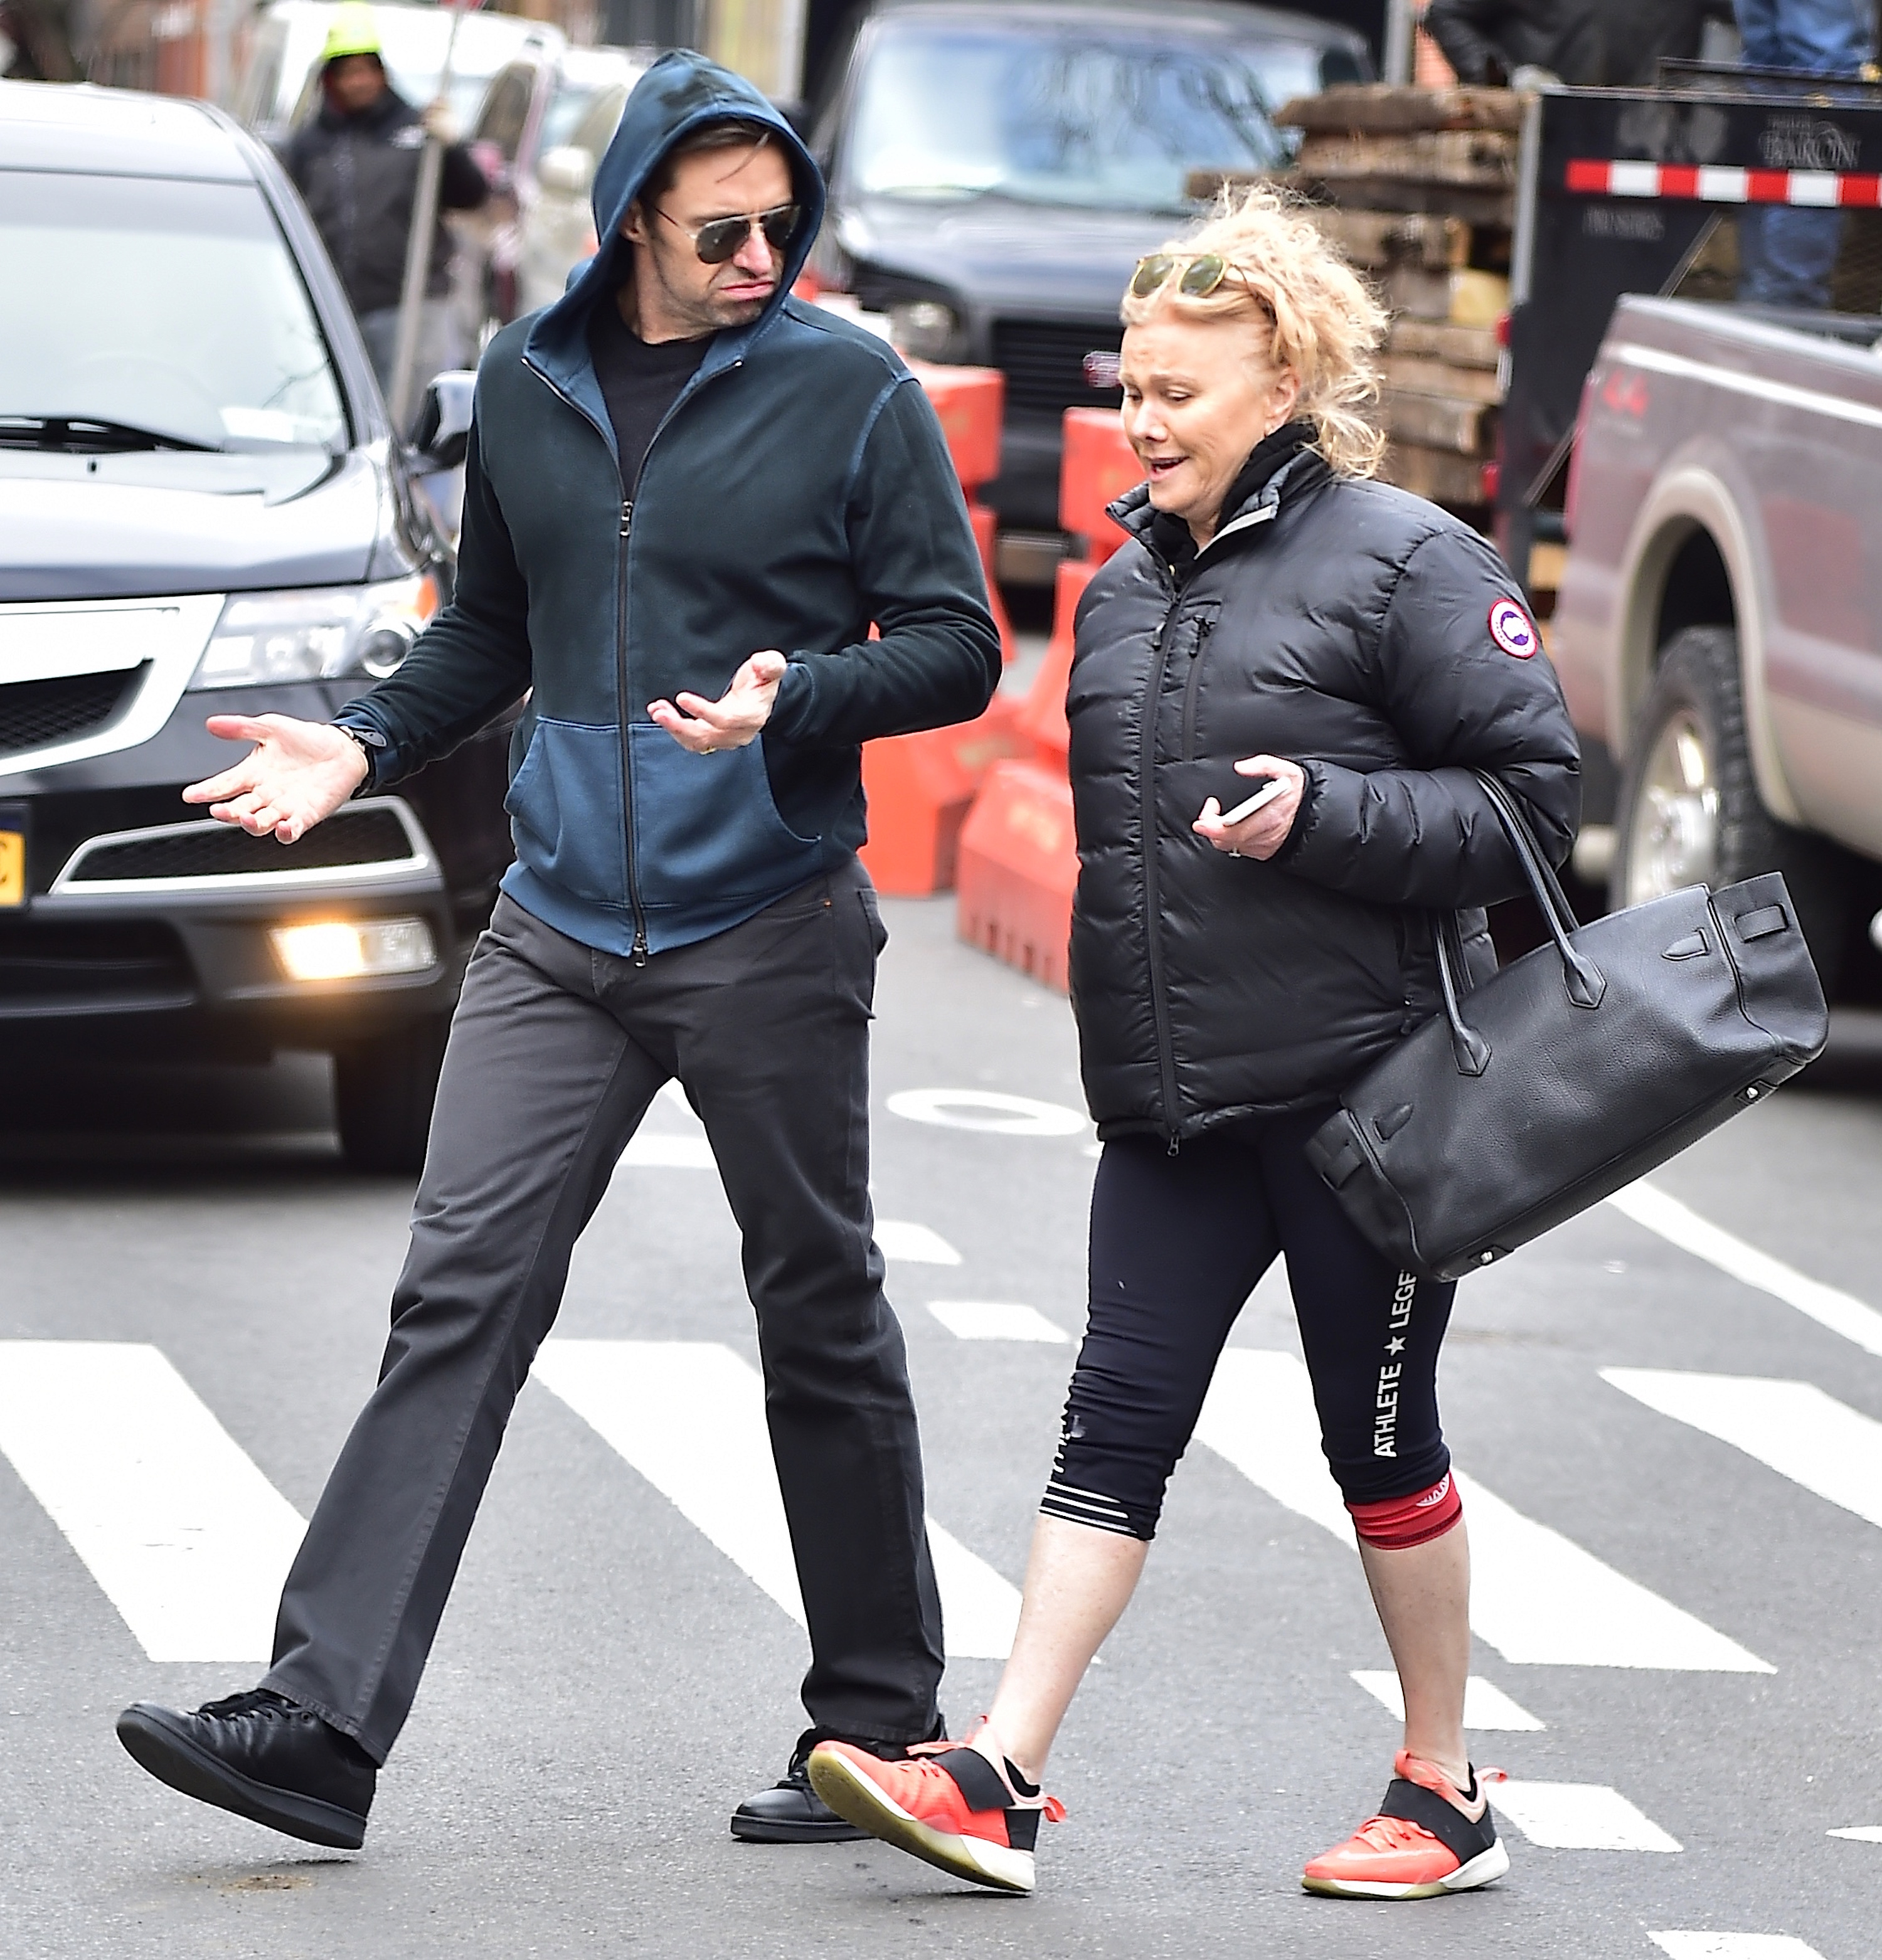 Hugh Jackman and Deborra-Lee Furness spotted in New York City, 2018 | Source: Getty Images